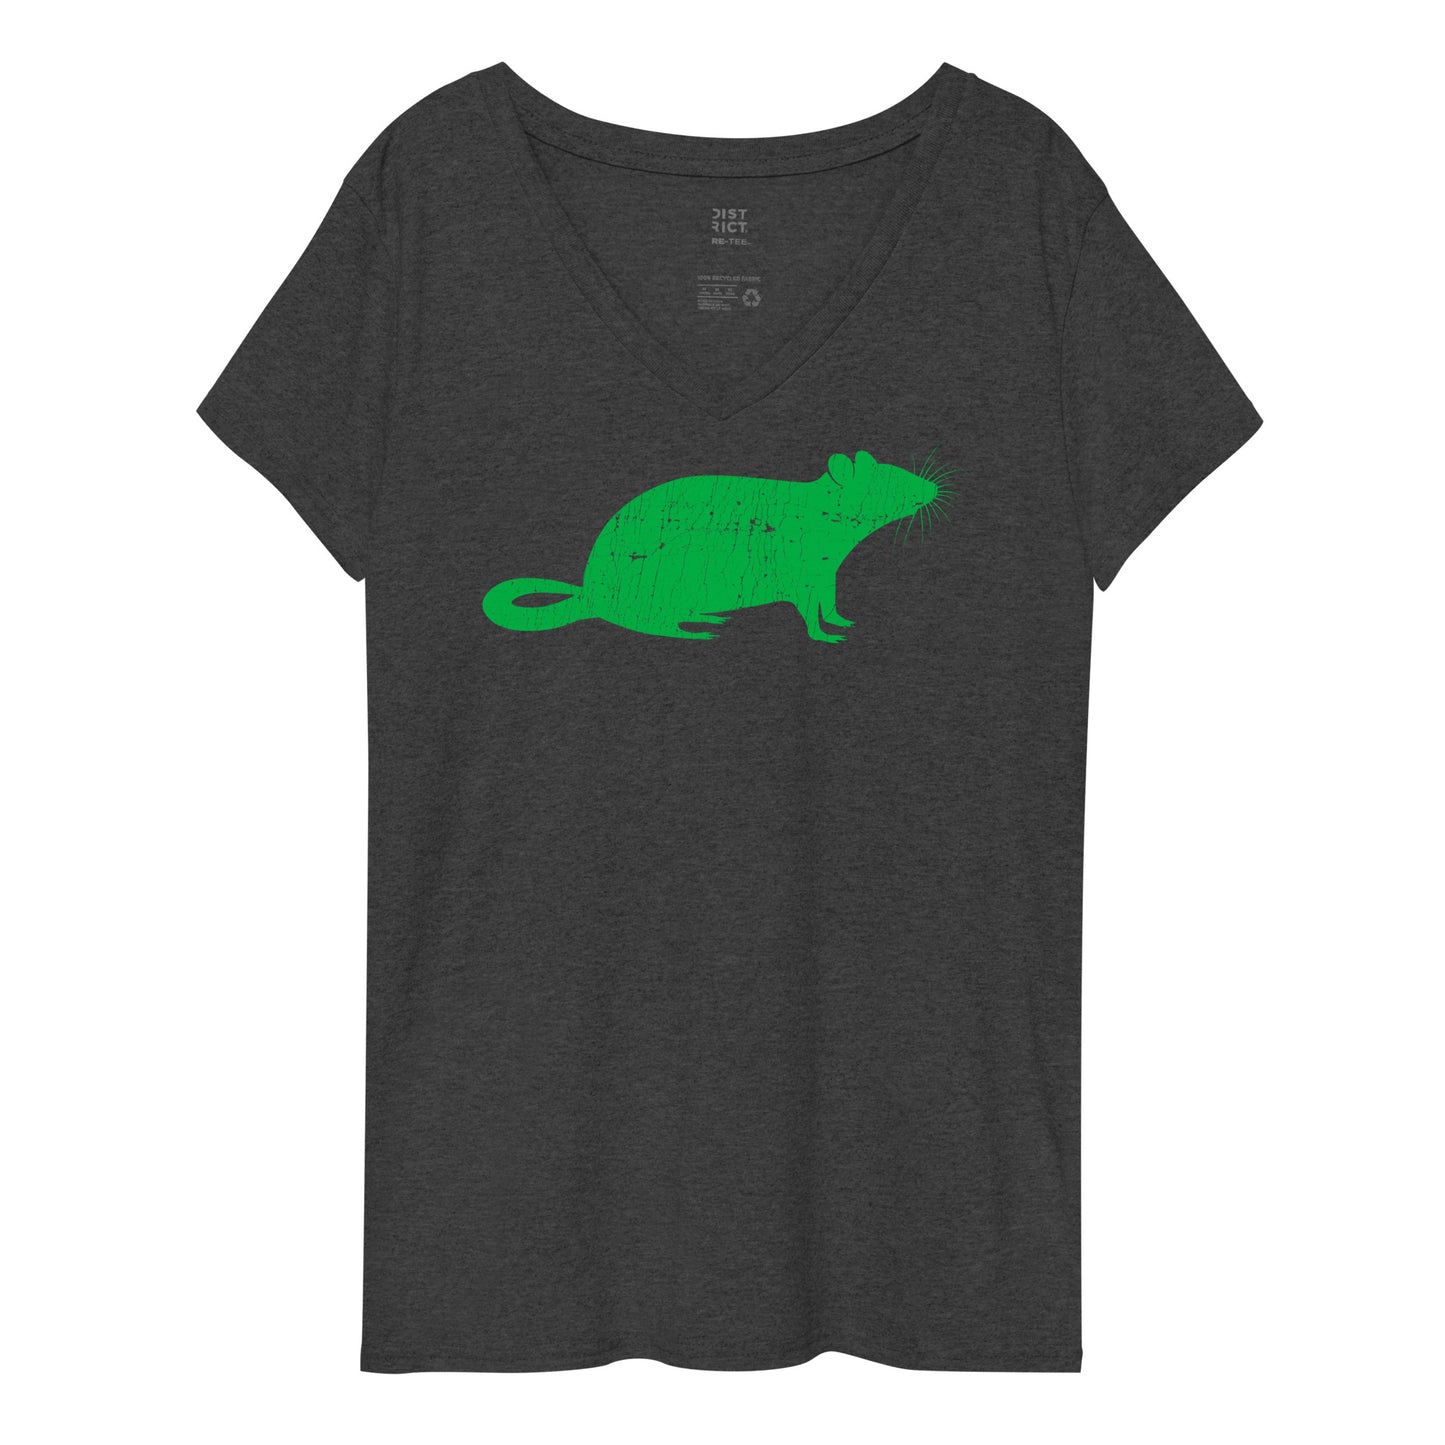 RAT (distressed)-Women’s recycled v-neck t-shirt